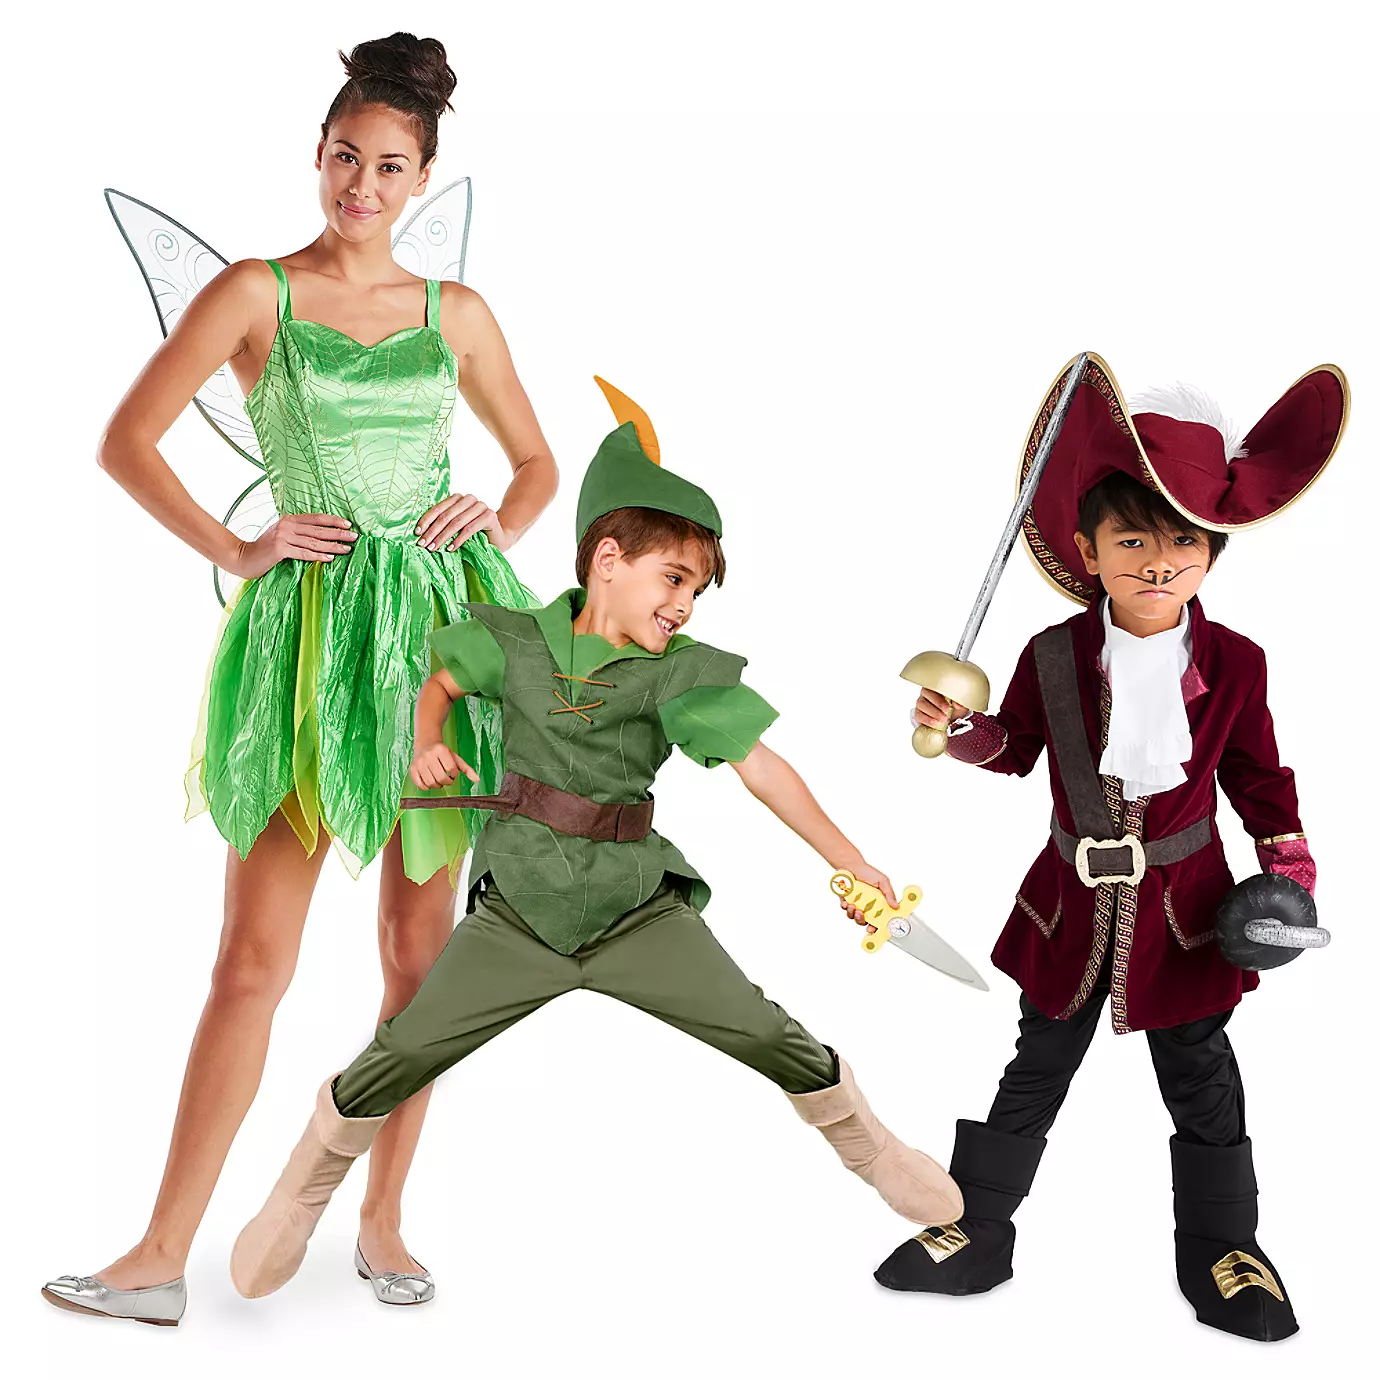 The 45 Best Disney Halloween Costumes & Products [2020]